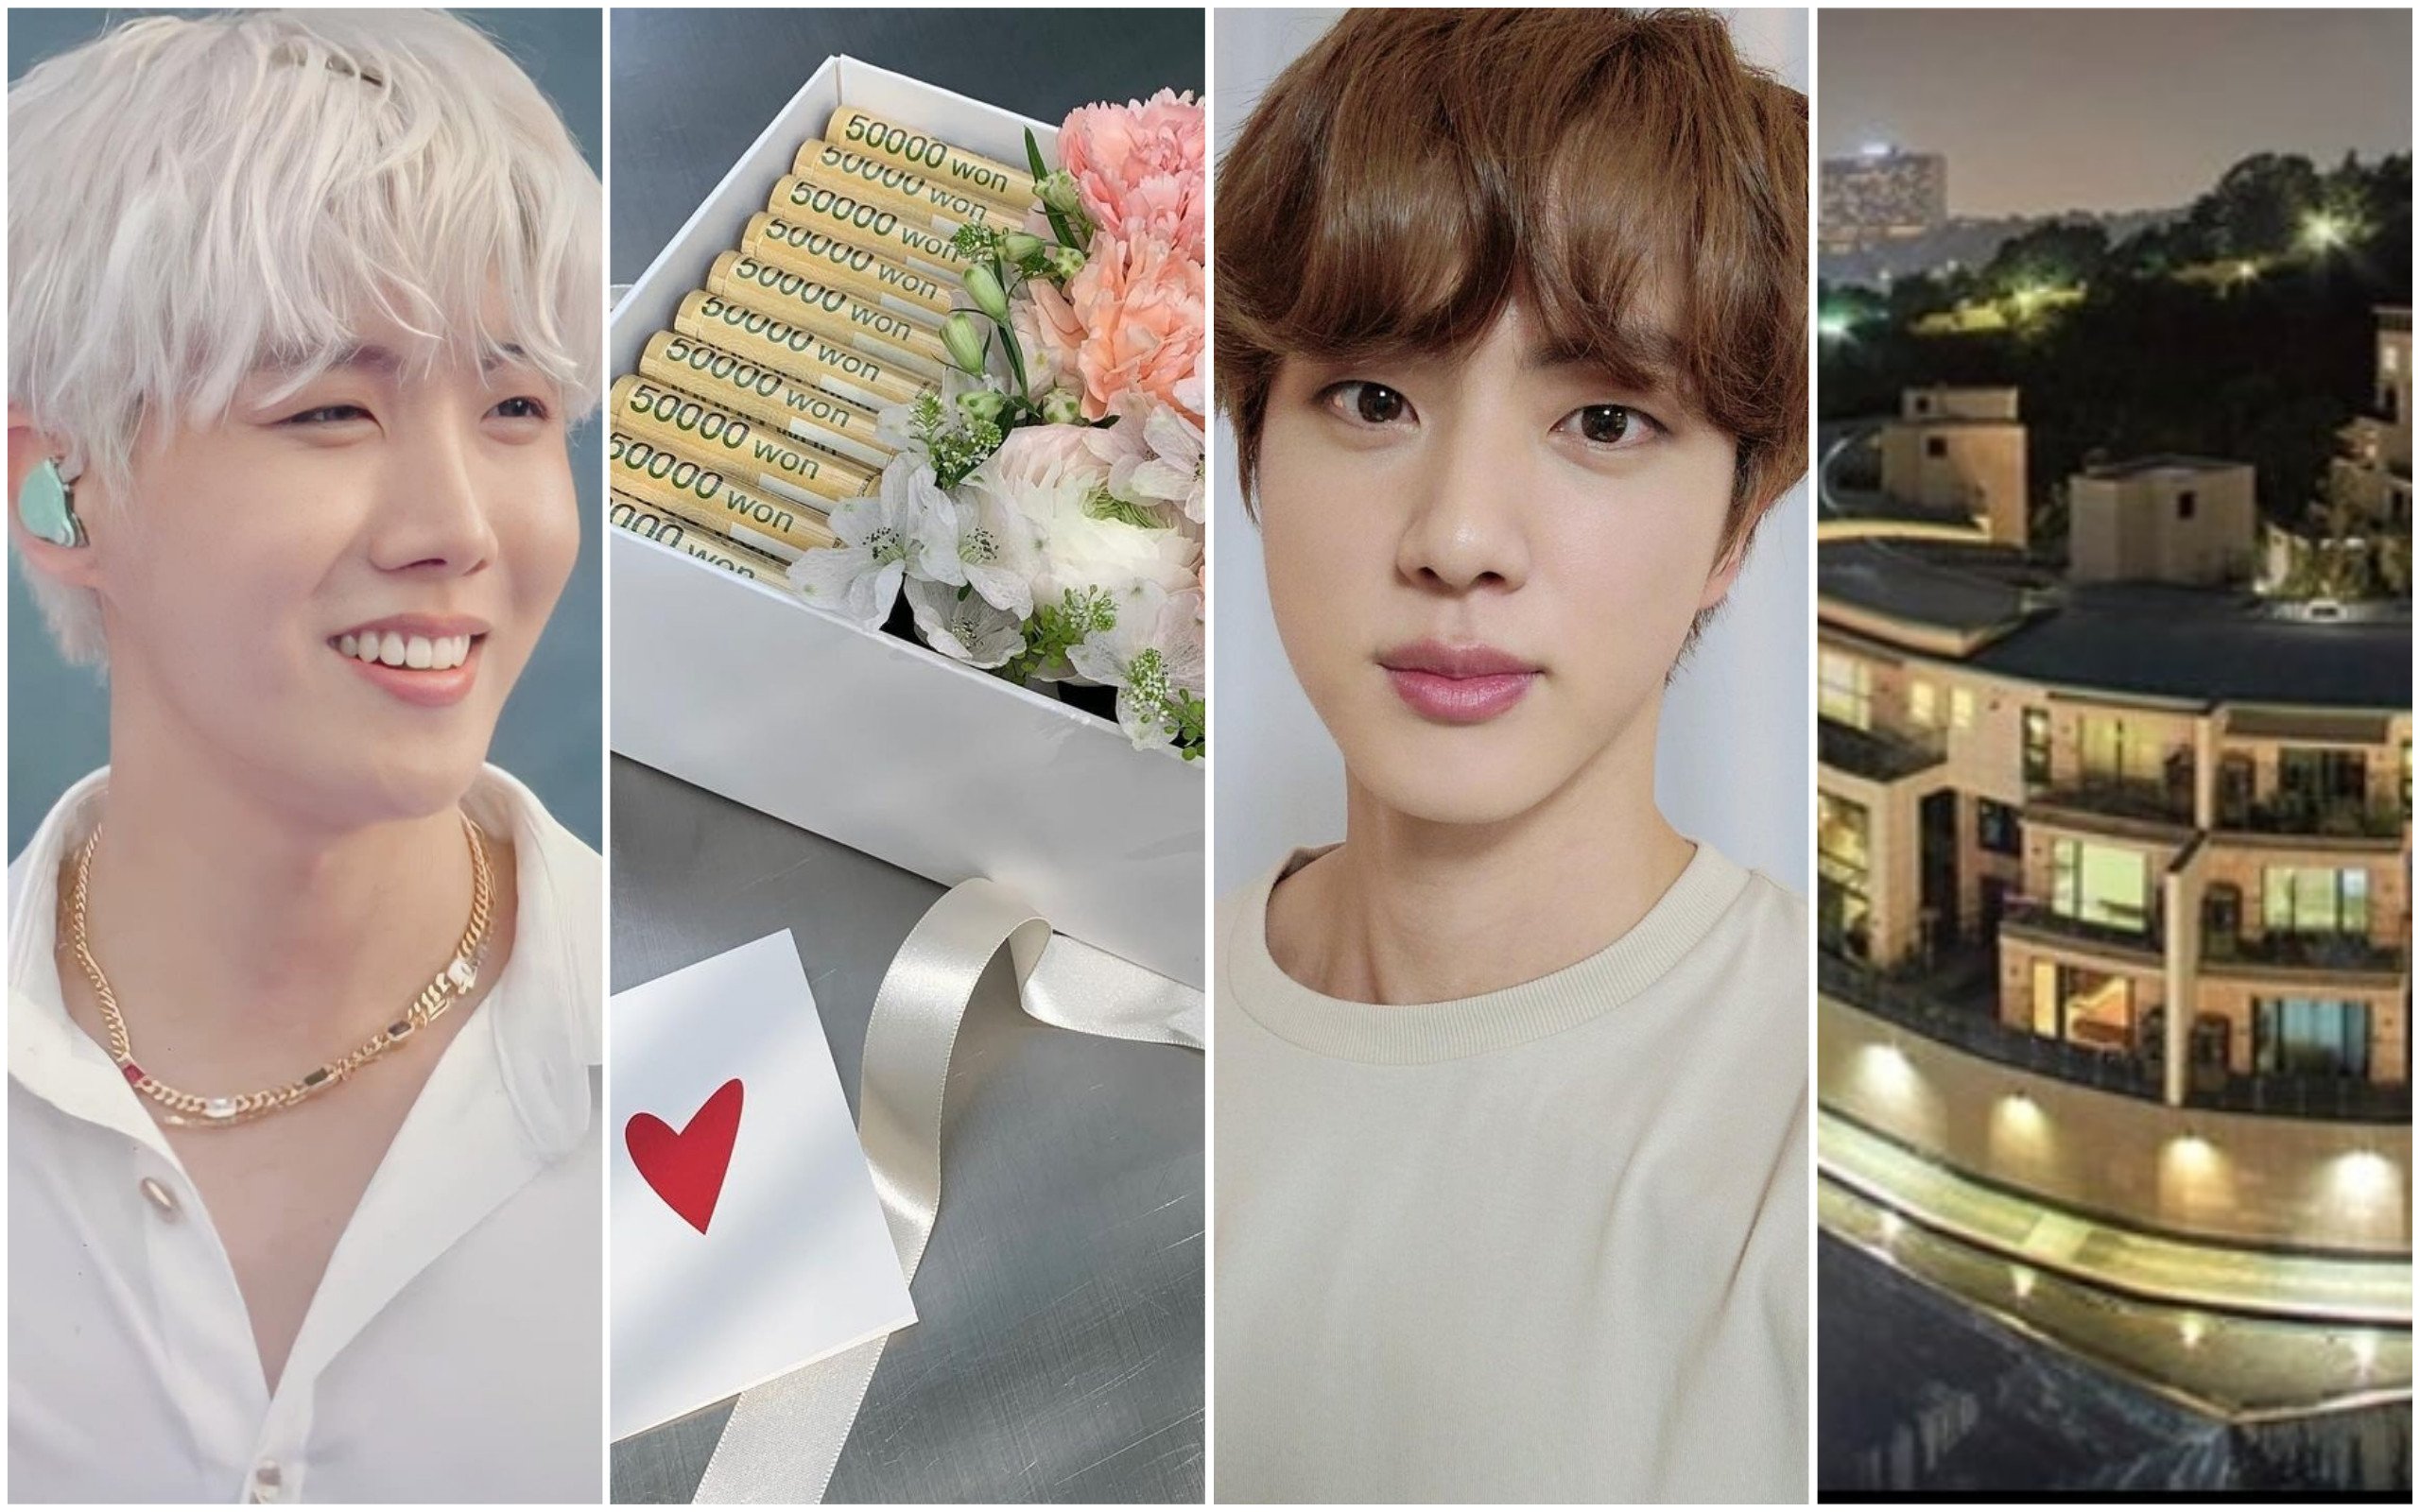 A close look at the most expensive things owned by BTS members